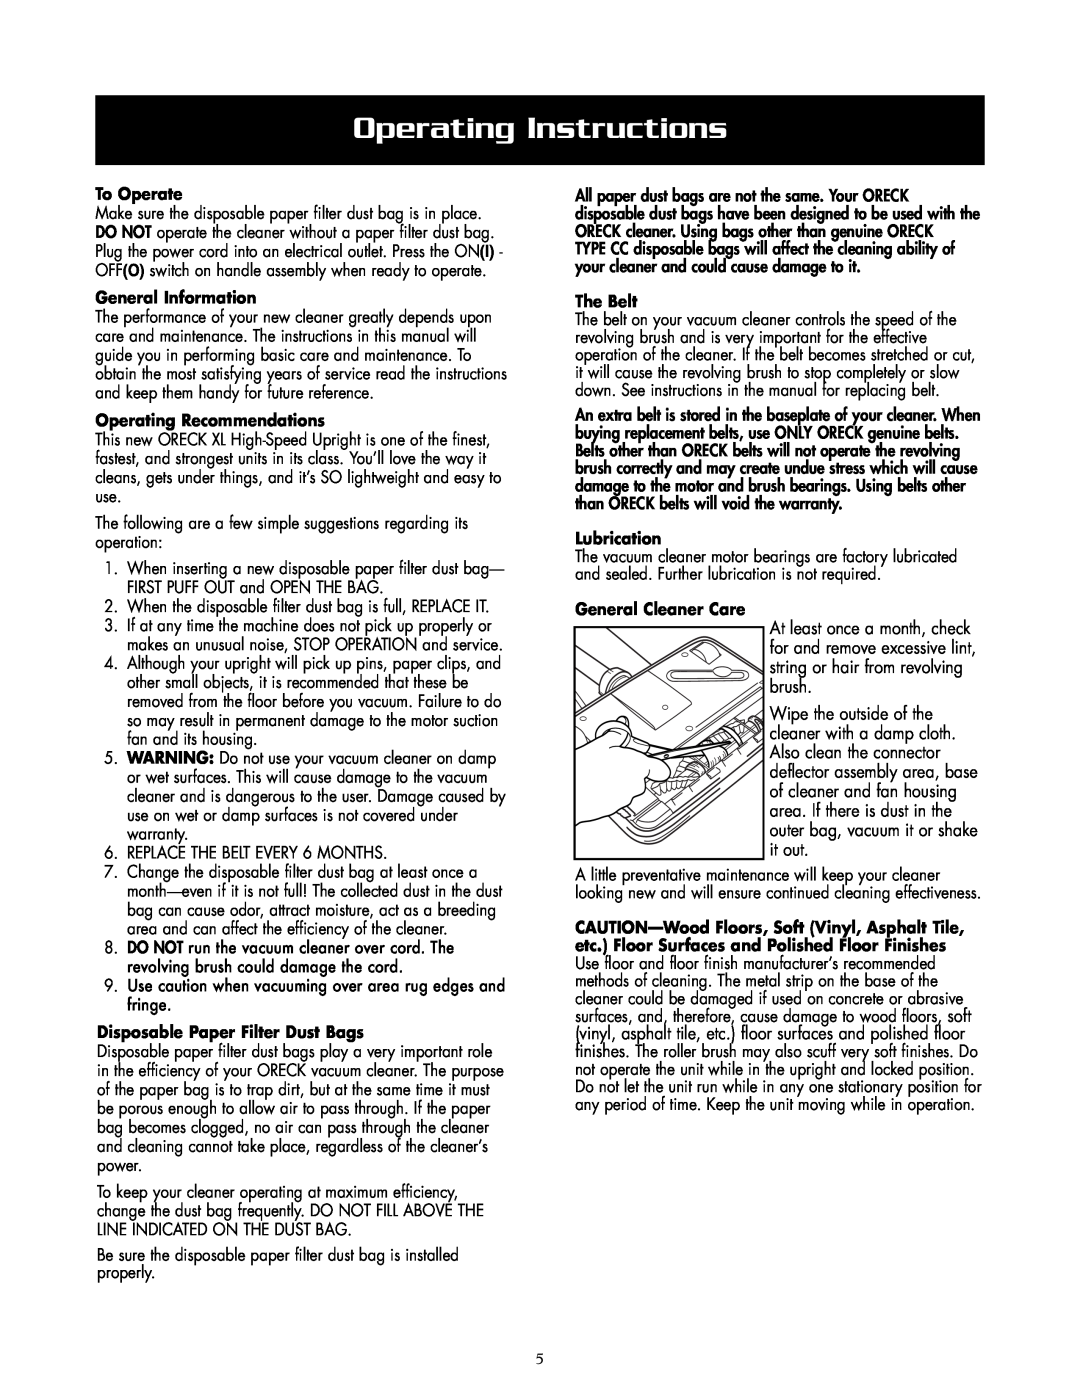 Oreck 2635RH Operating Instructions, To Operate, General Information, Operating Recommendations, The Belt, Lubrication 